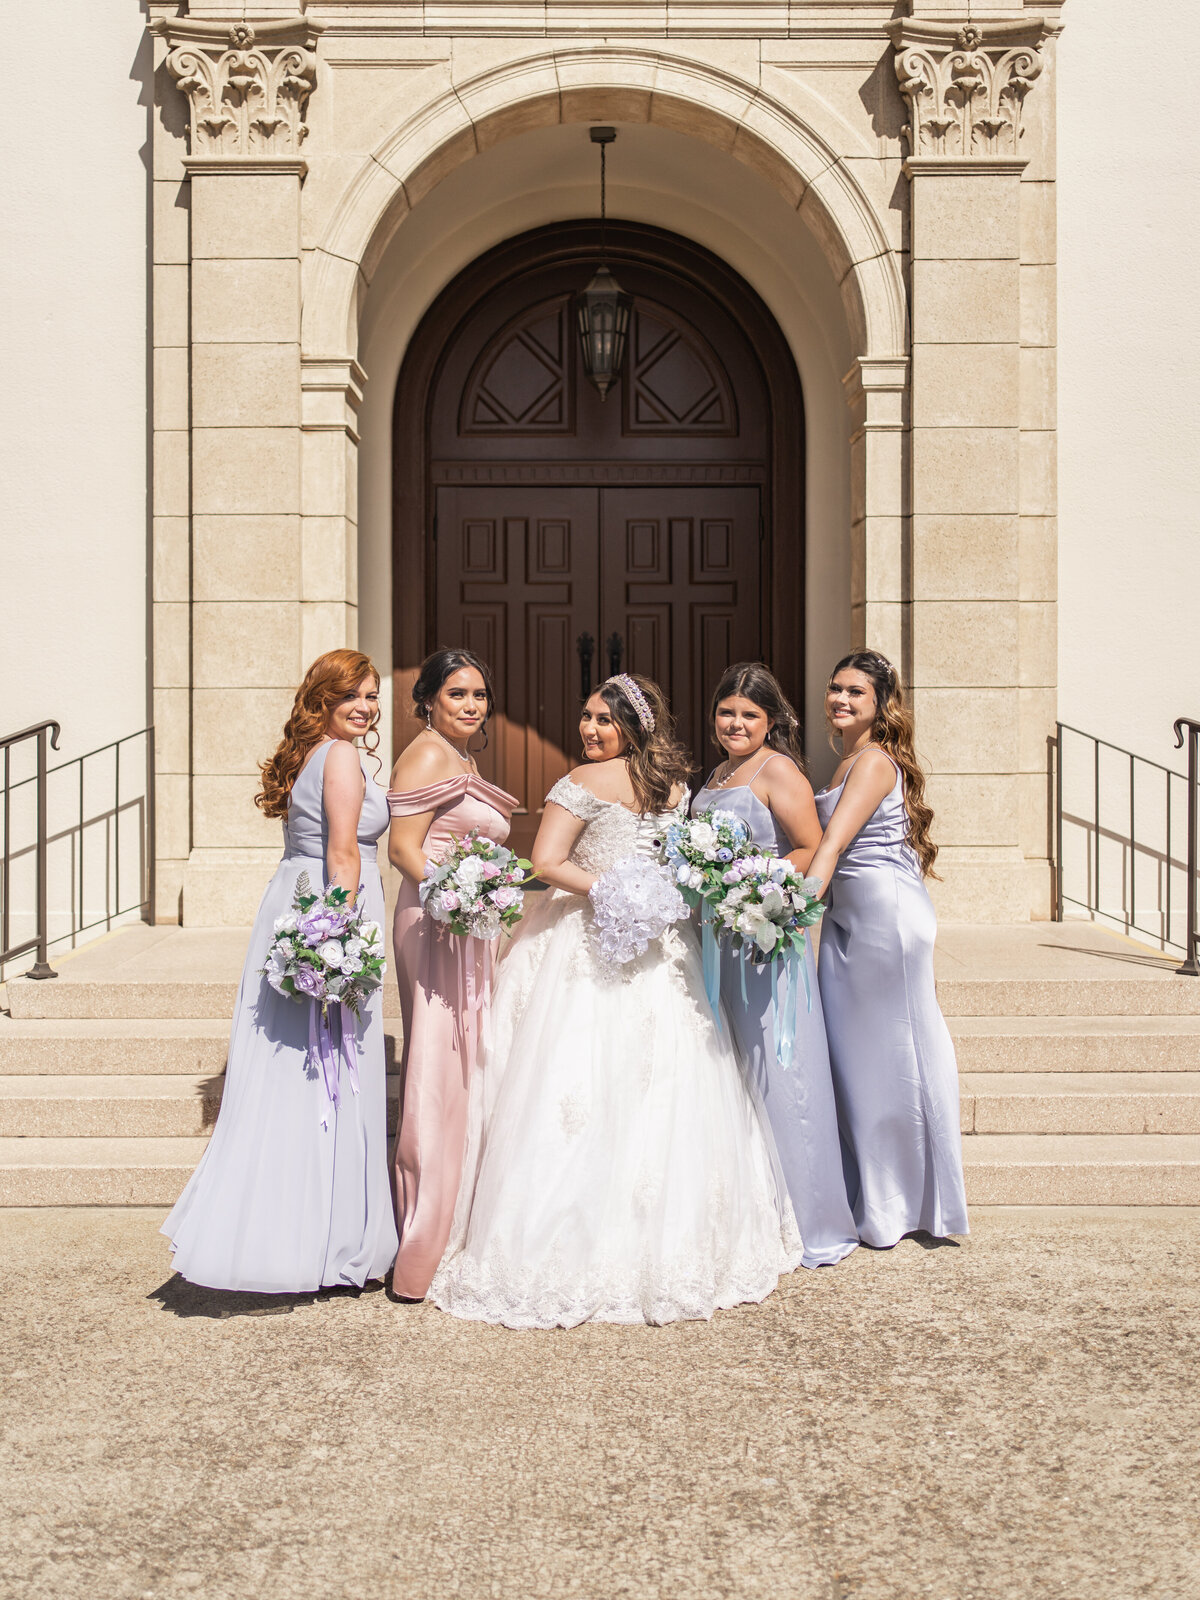 Brides and bridesmaids in front of a church in San Francisco